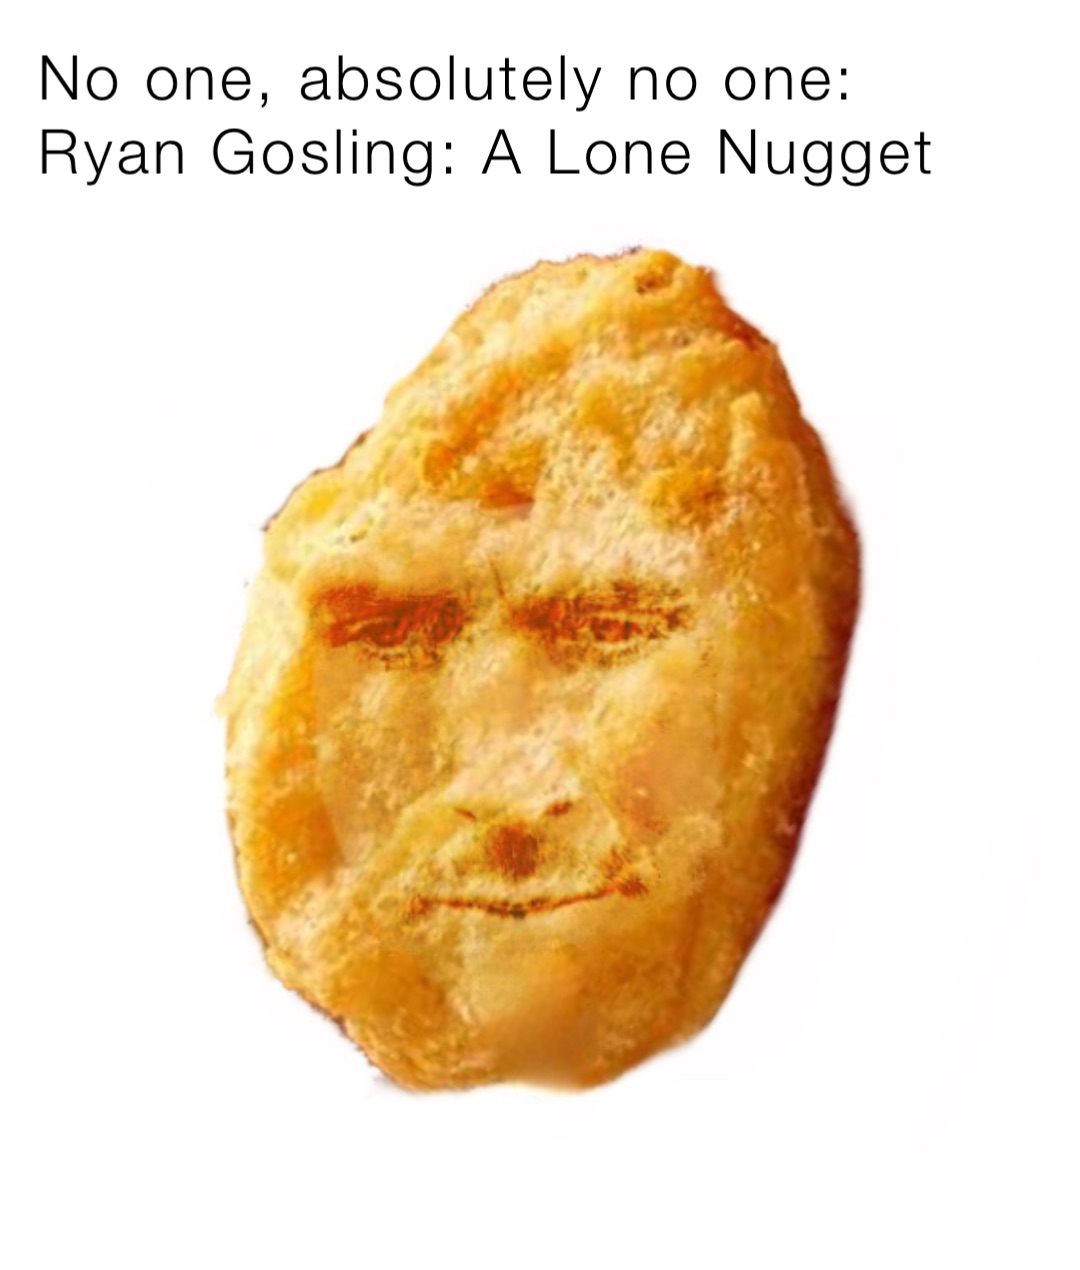 No one, absolutely no one:
Ryan Gosling: A Lone Nugget